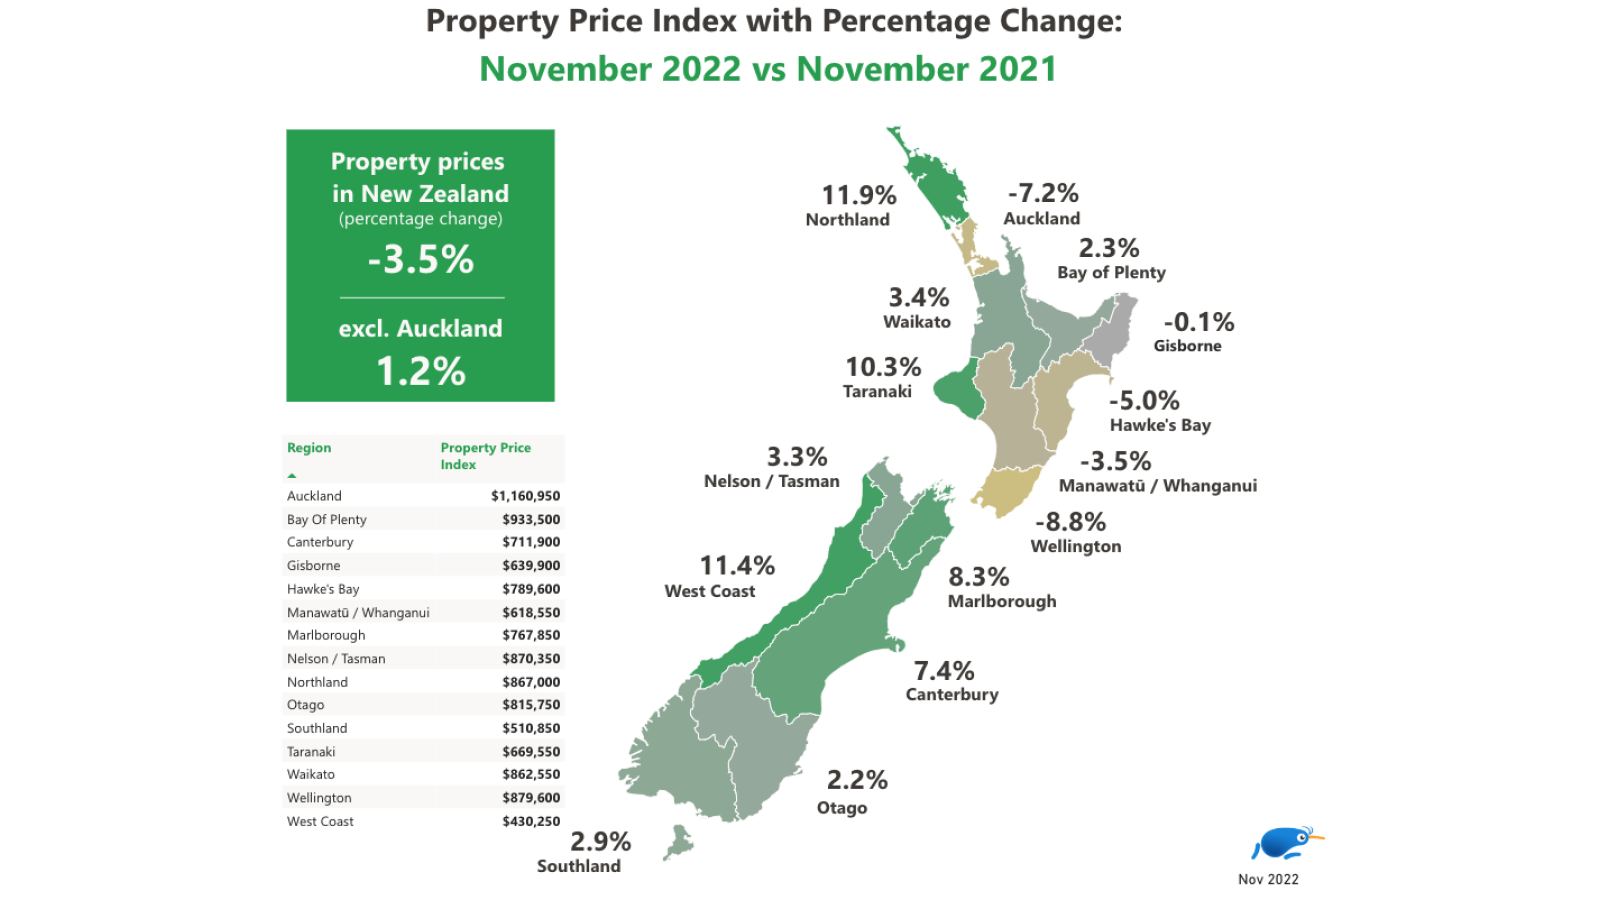 Map of New Zealand showing property price index